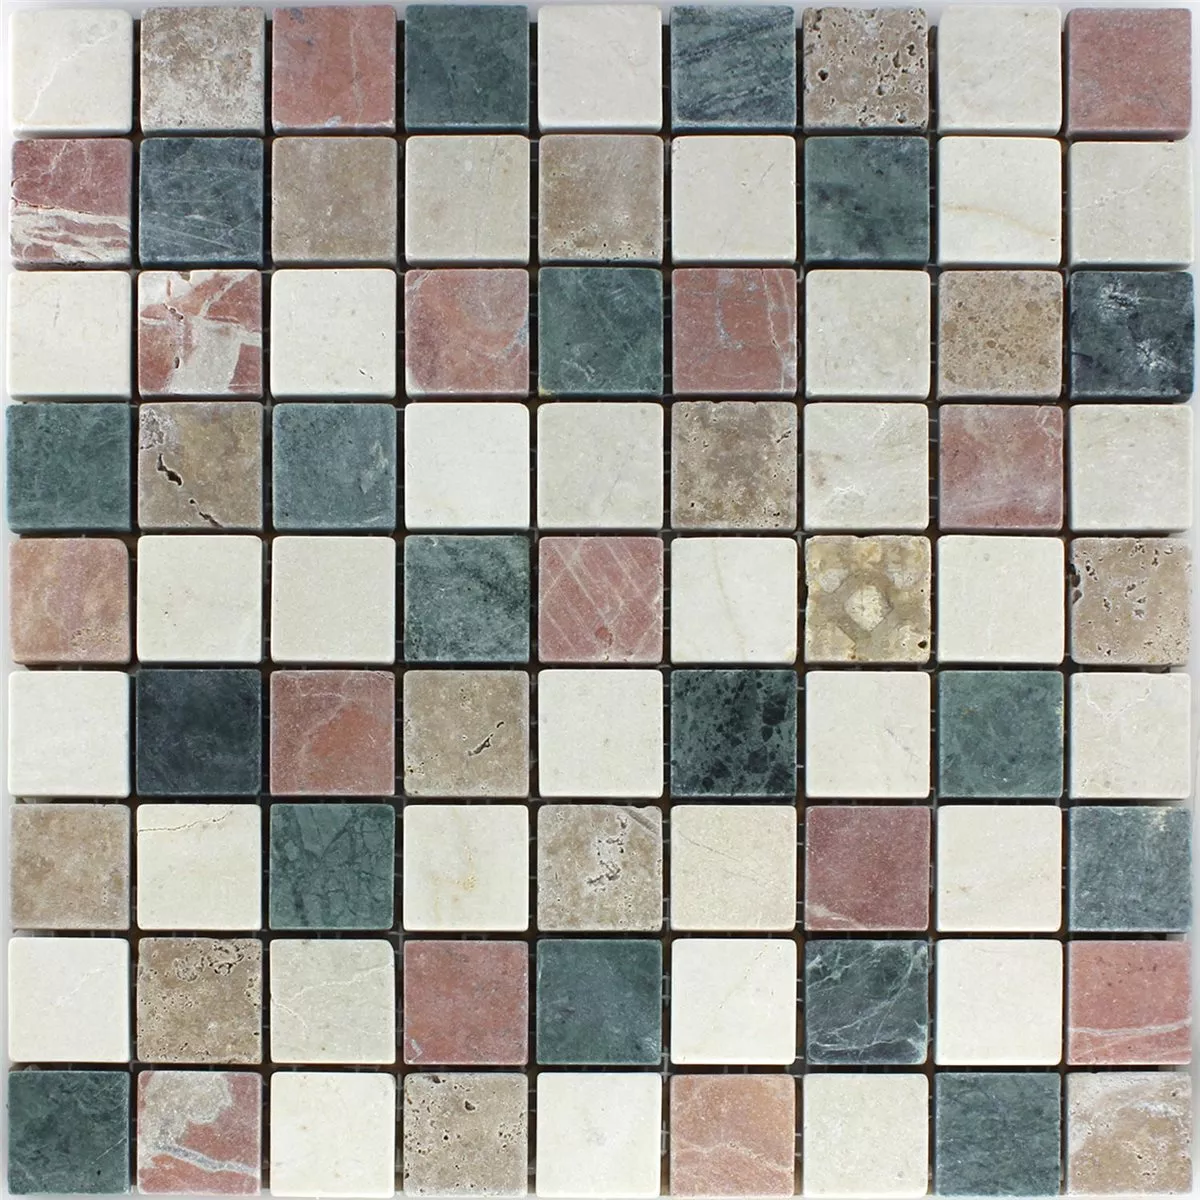 Sample Mosaic Tiles Marble Natural Stone Cotto Beige Green Noce